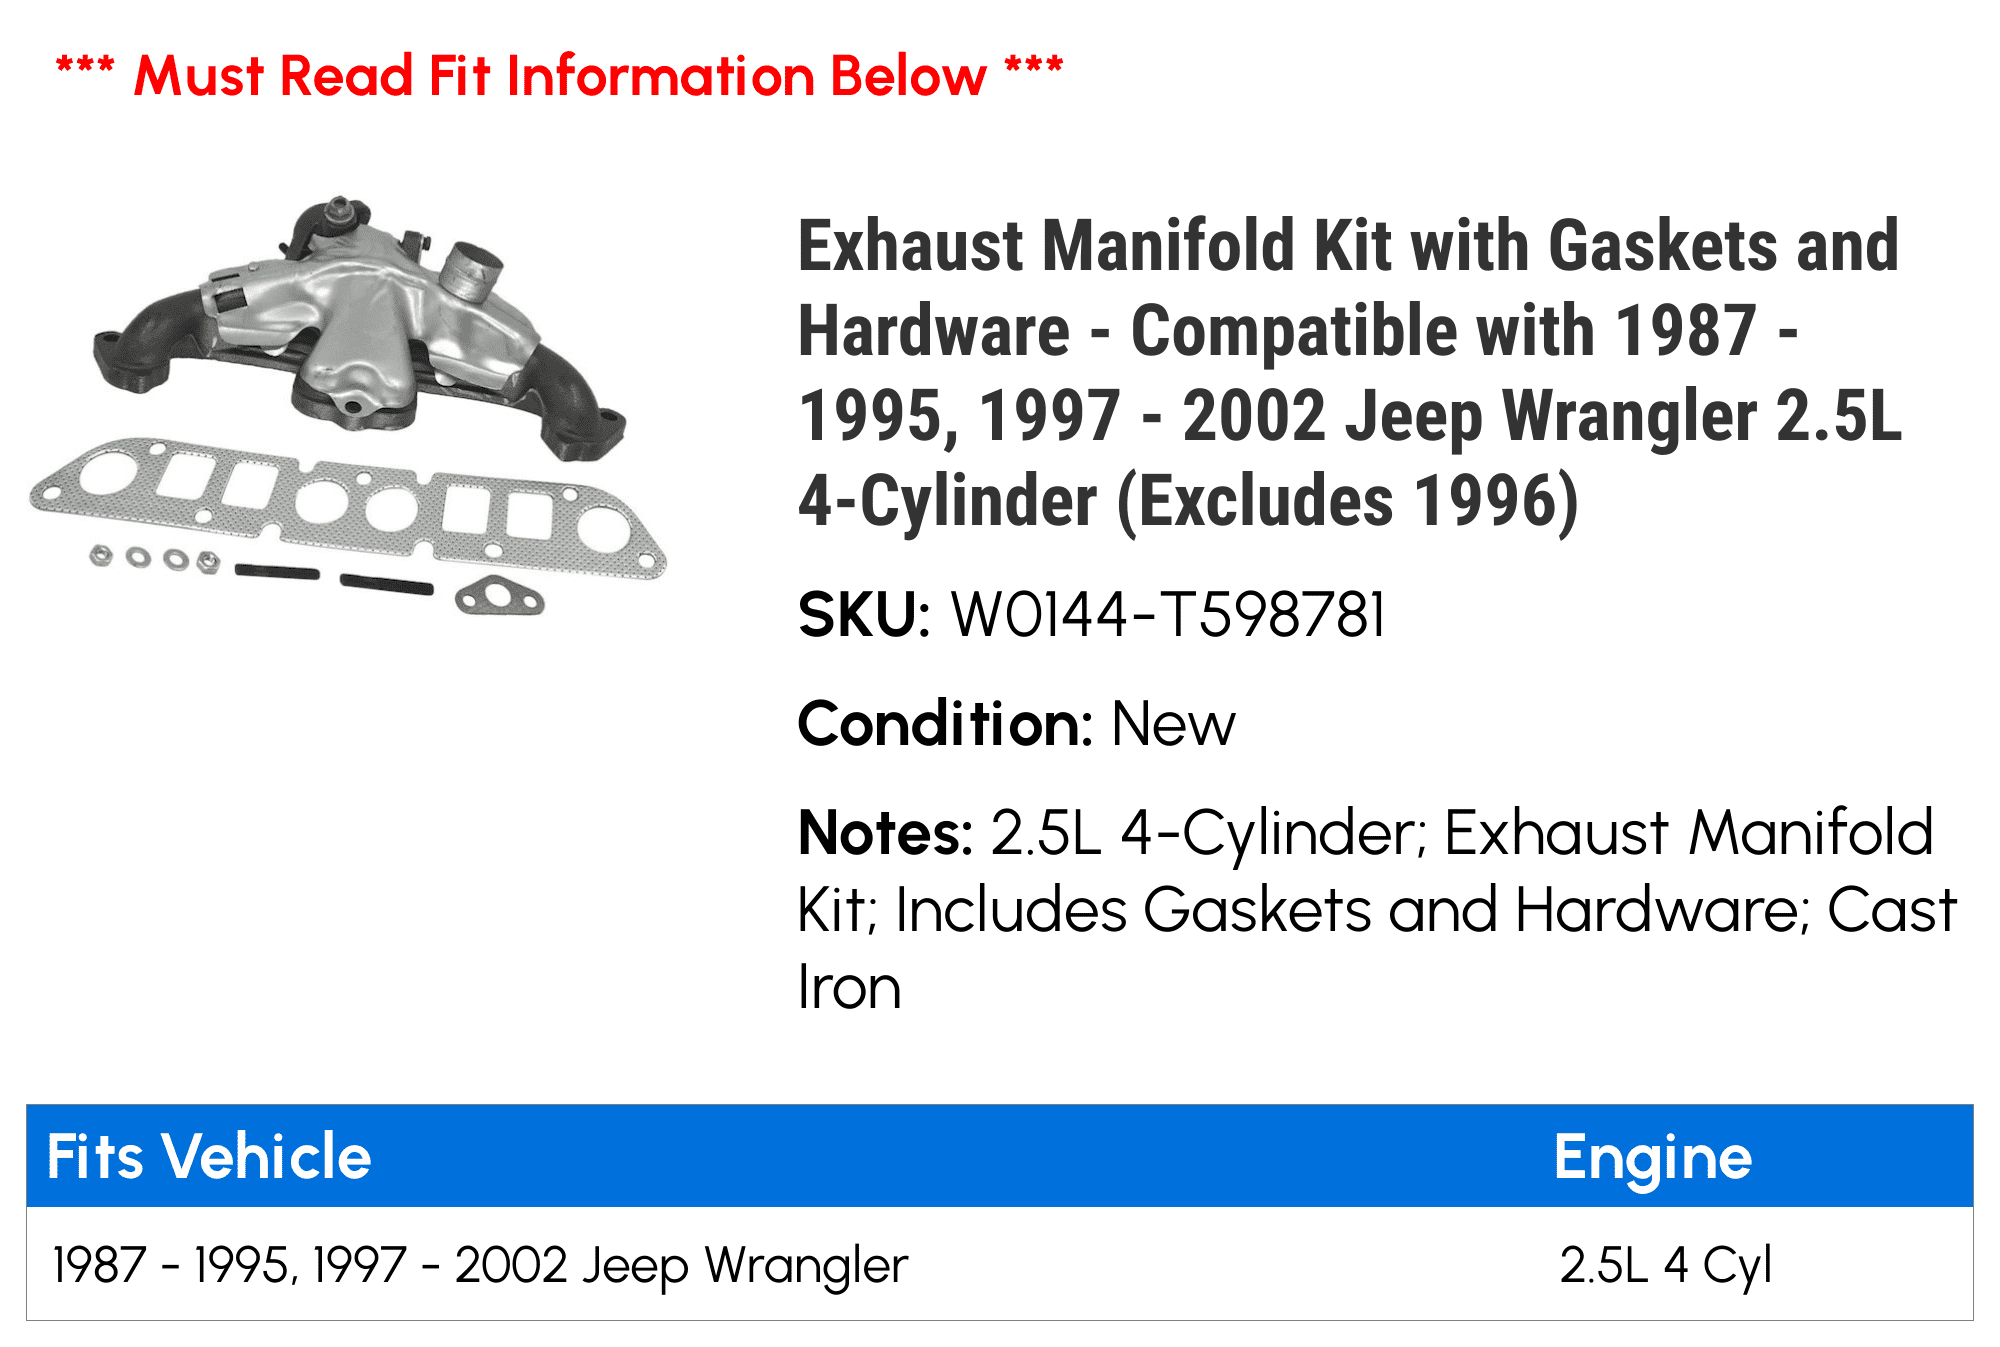 Exhaust Manifold Kit with Gaskets and Hardware Compatible with 1987 1995,  1997 2002 Jeep Wrangler 2.5L 4-Cylinder (Excludes 1996) 1989 1990 1991  1992 1994 1998 1999 2000 2001